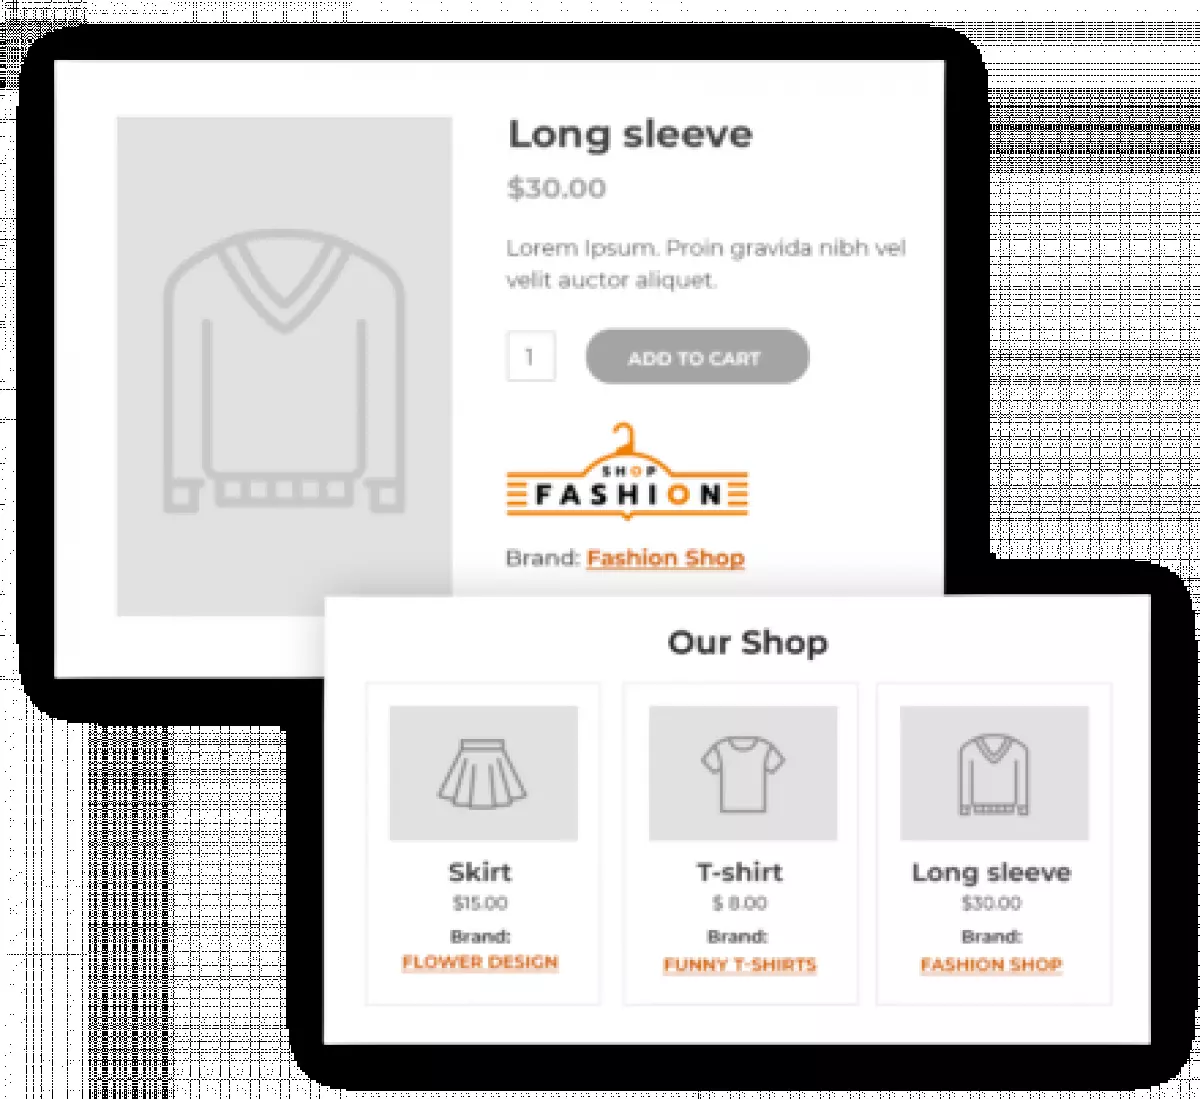  YITH WooCommerce Brands Add-On 